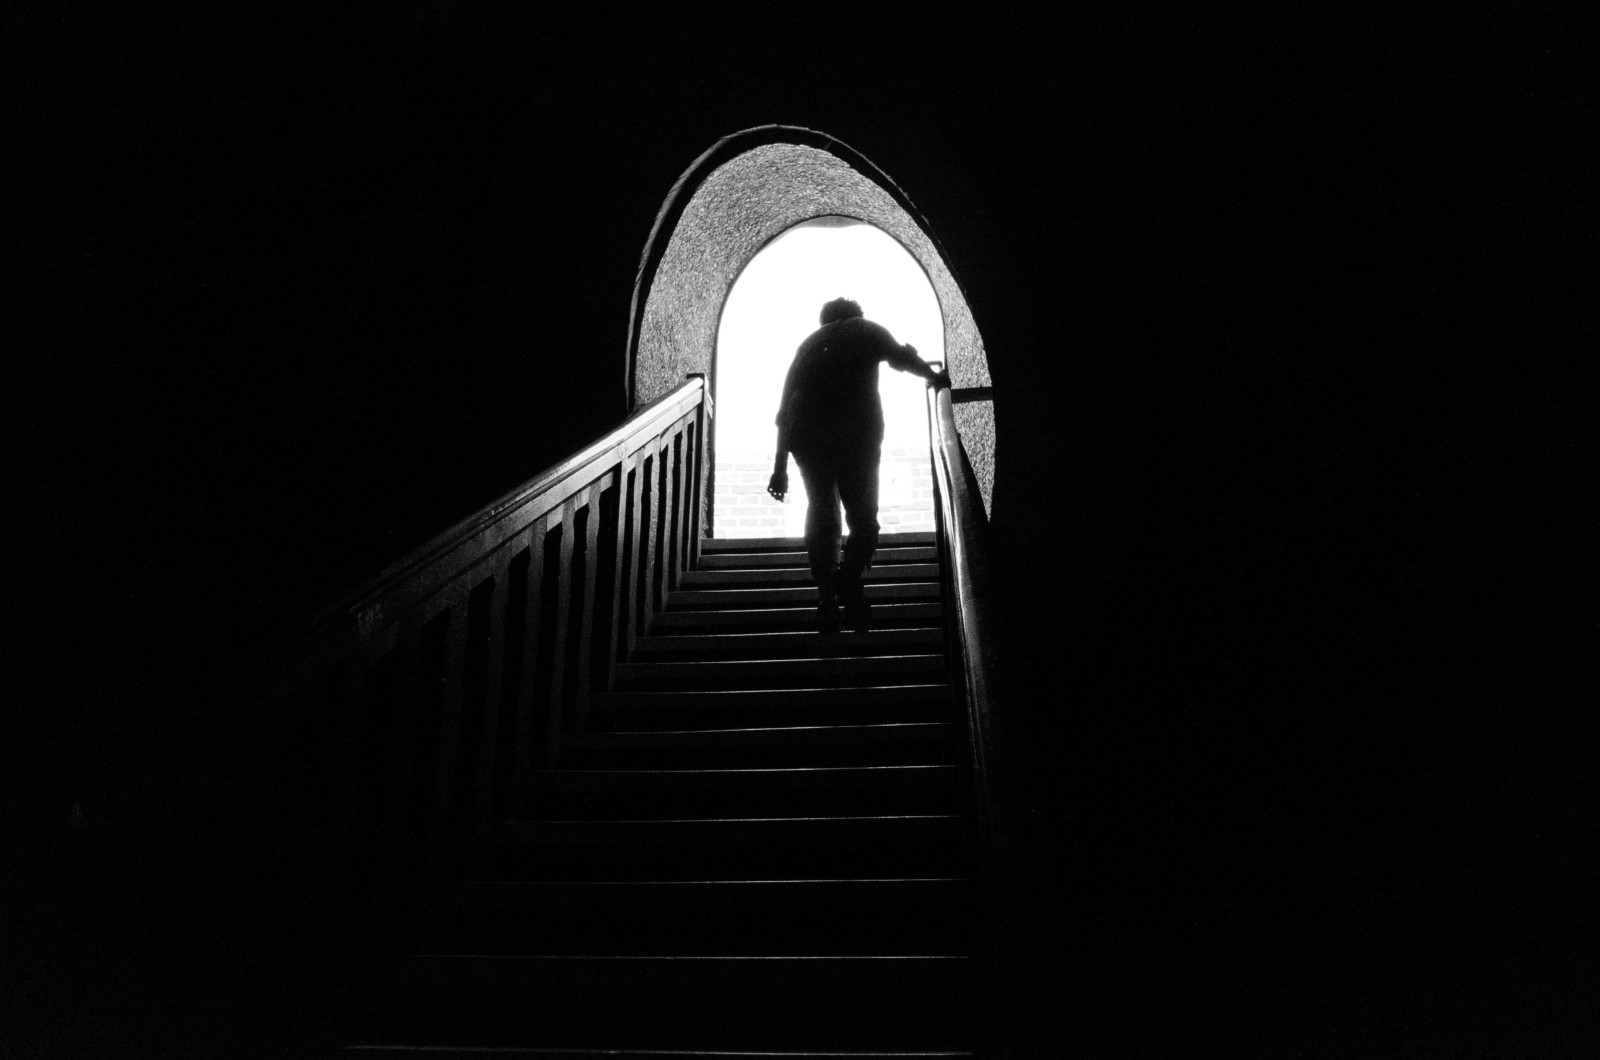 Black & White Photography Tip - Silhouettes